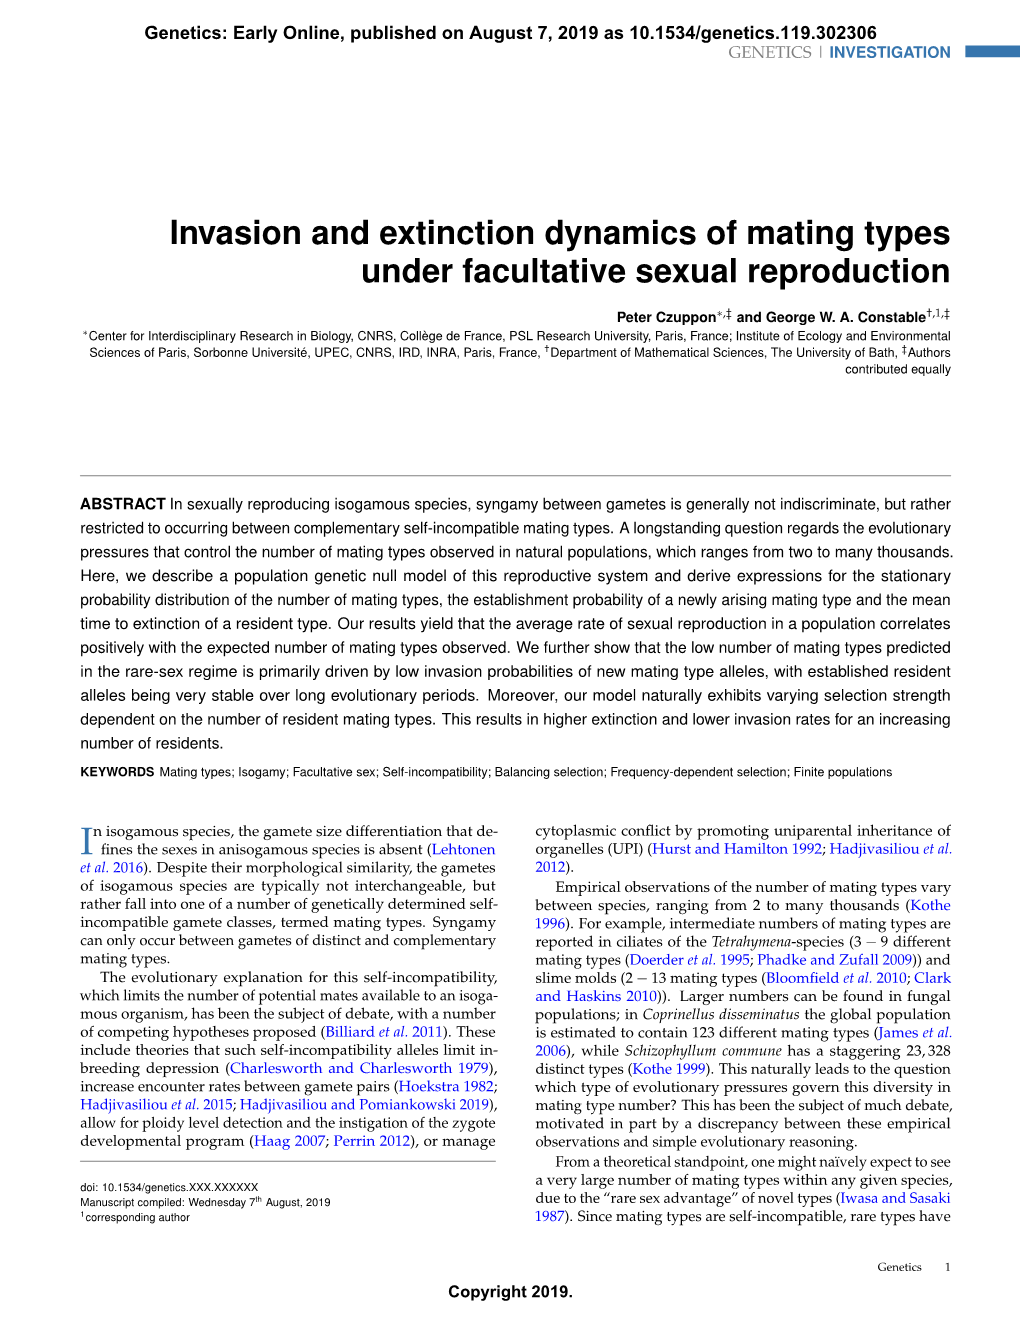 Invasion and Extinction Dynamics of Mating Types Under Facultative Sexual Reproduction